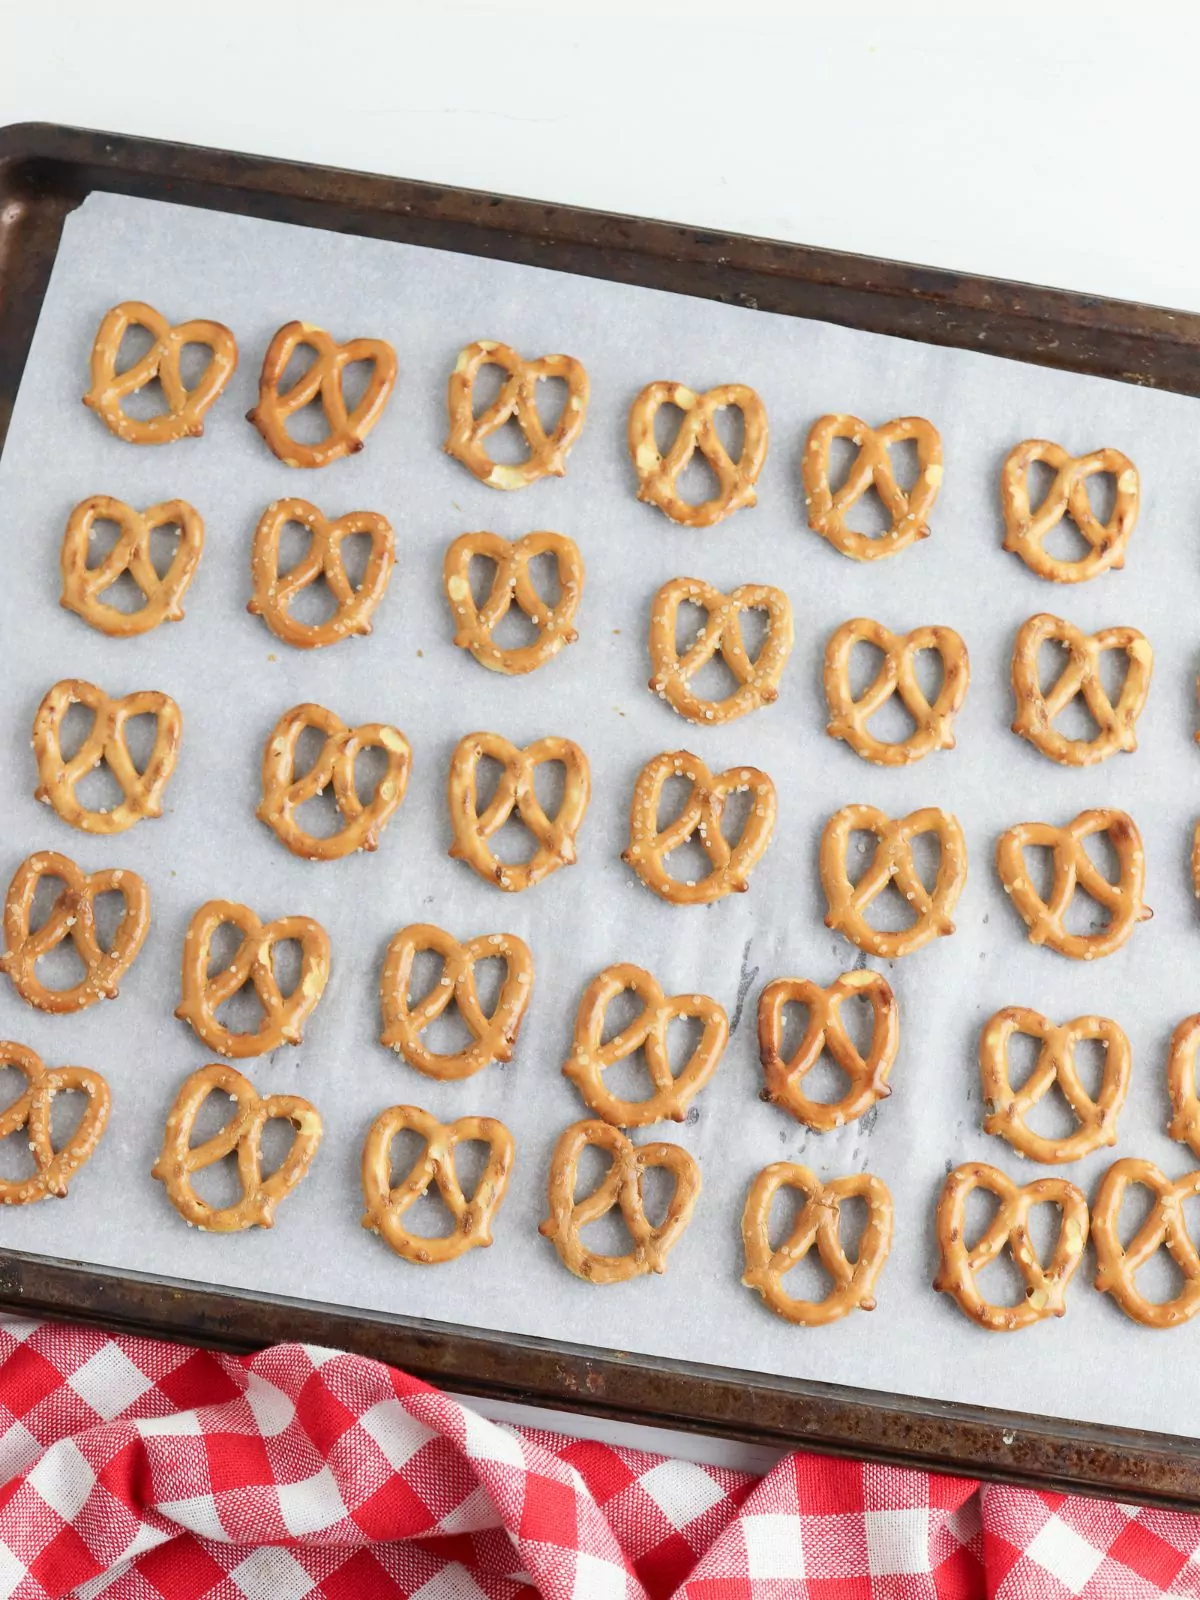 Lay pretzel twists on baking tray with parchment paper.